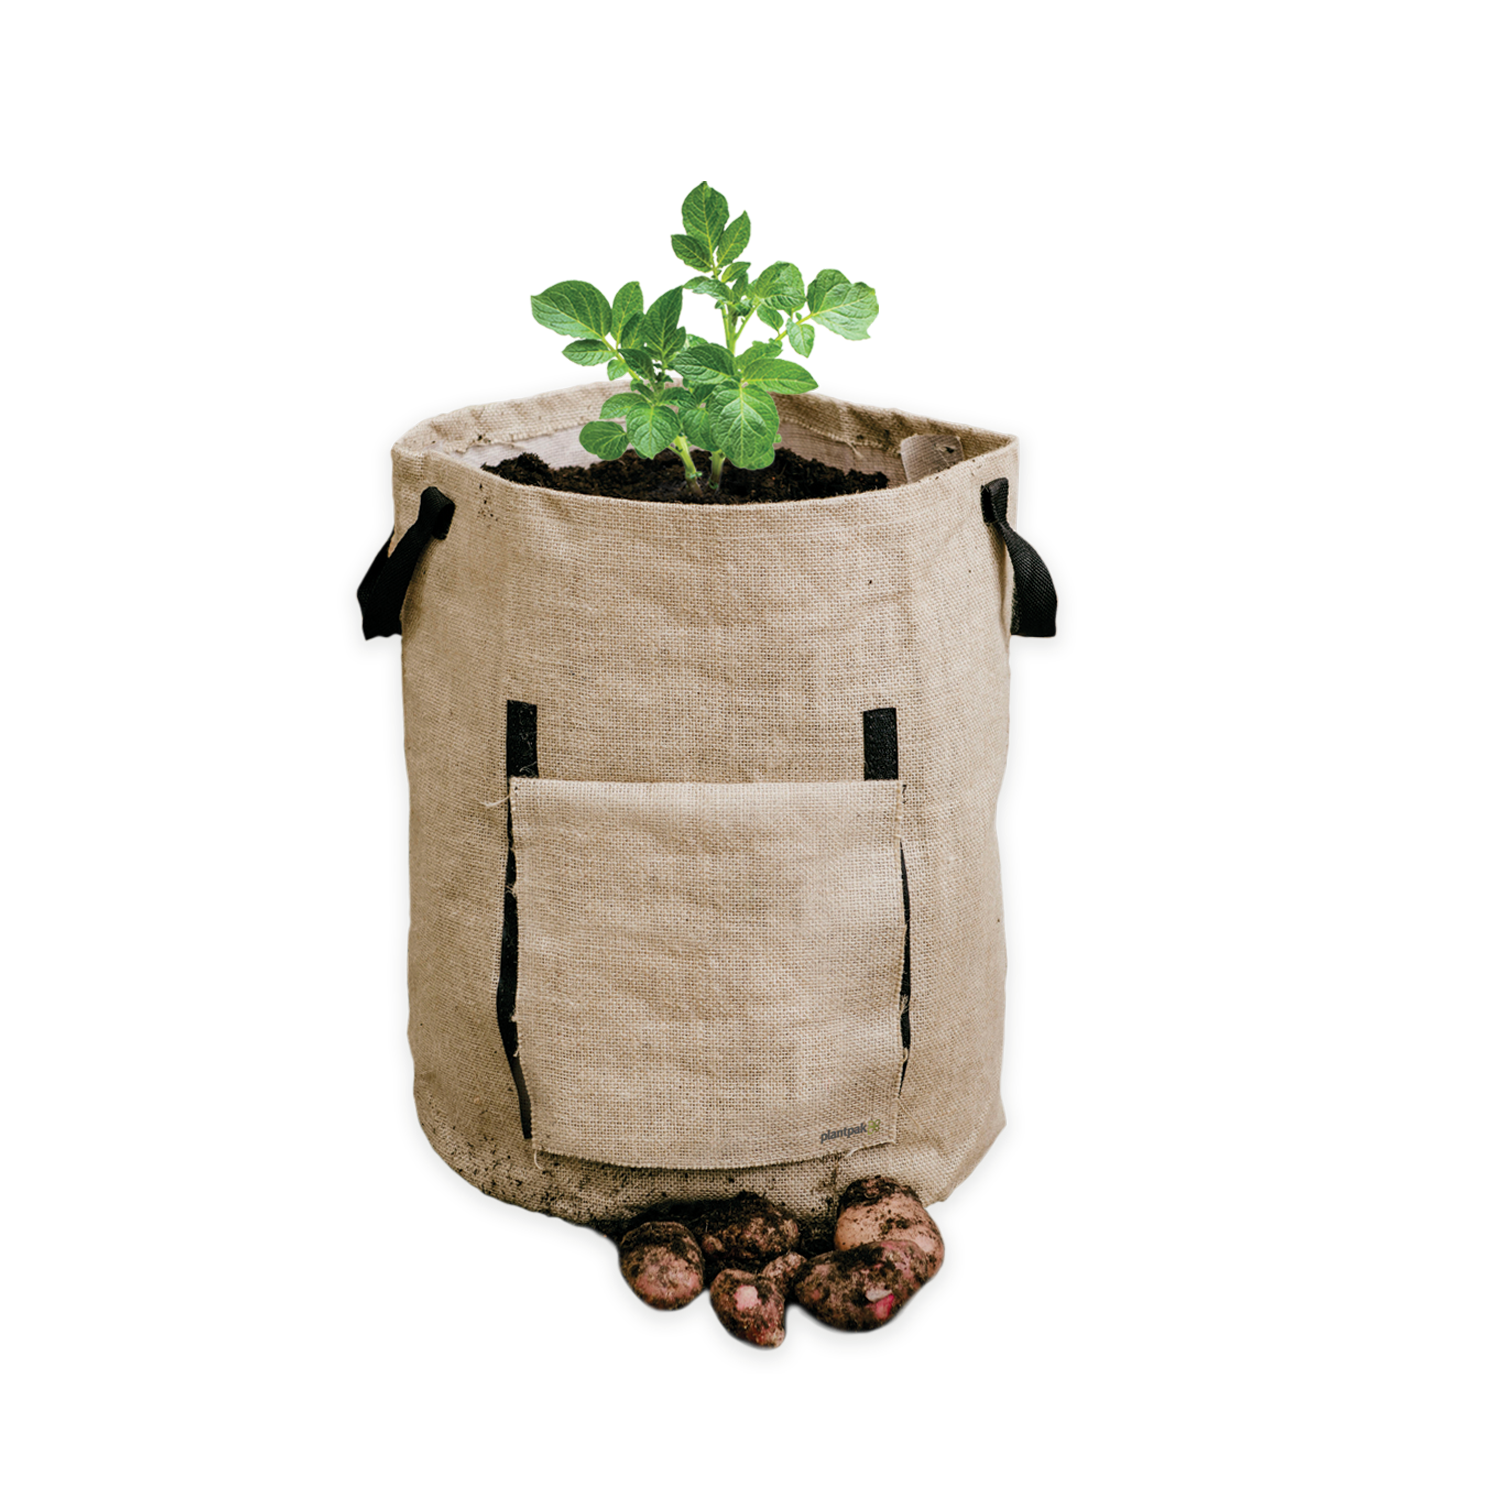 How To Grow Potatoes In Bags